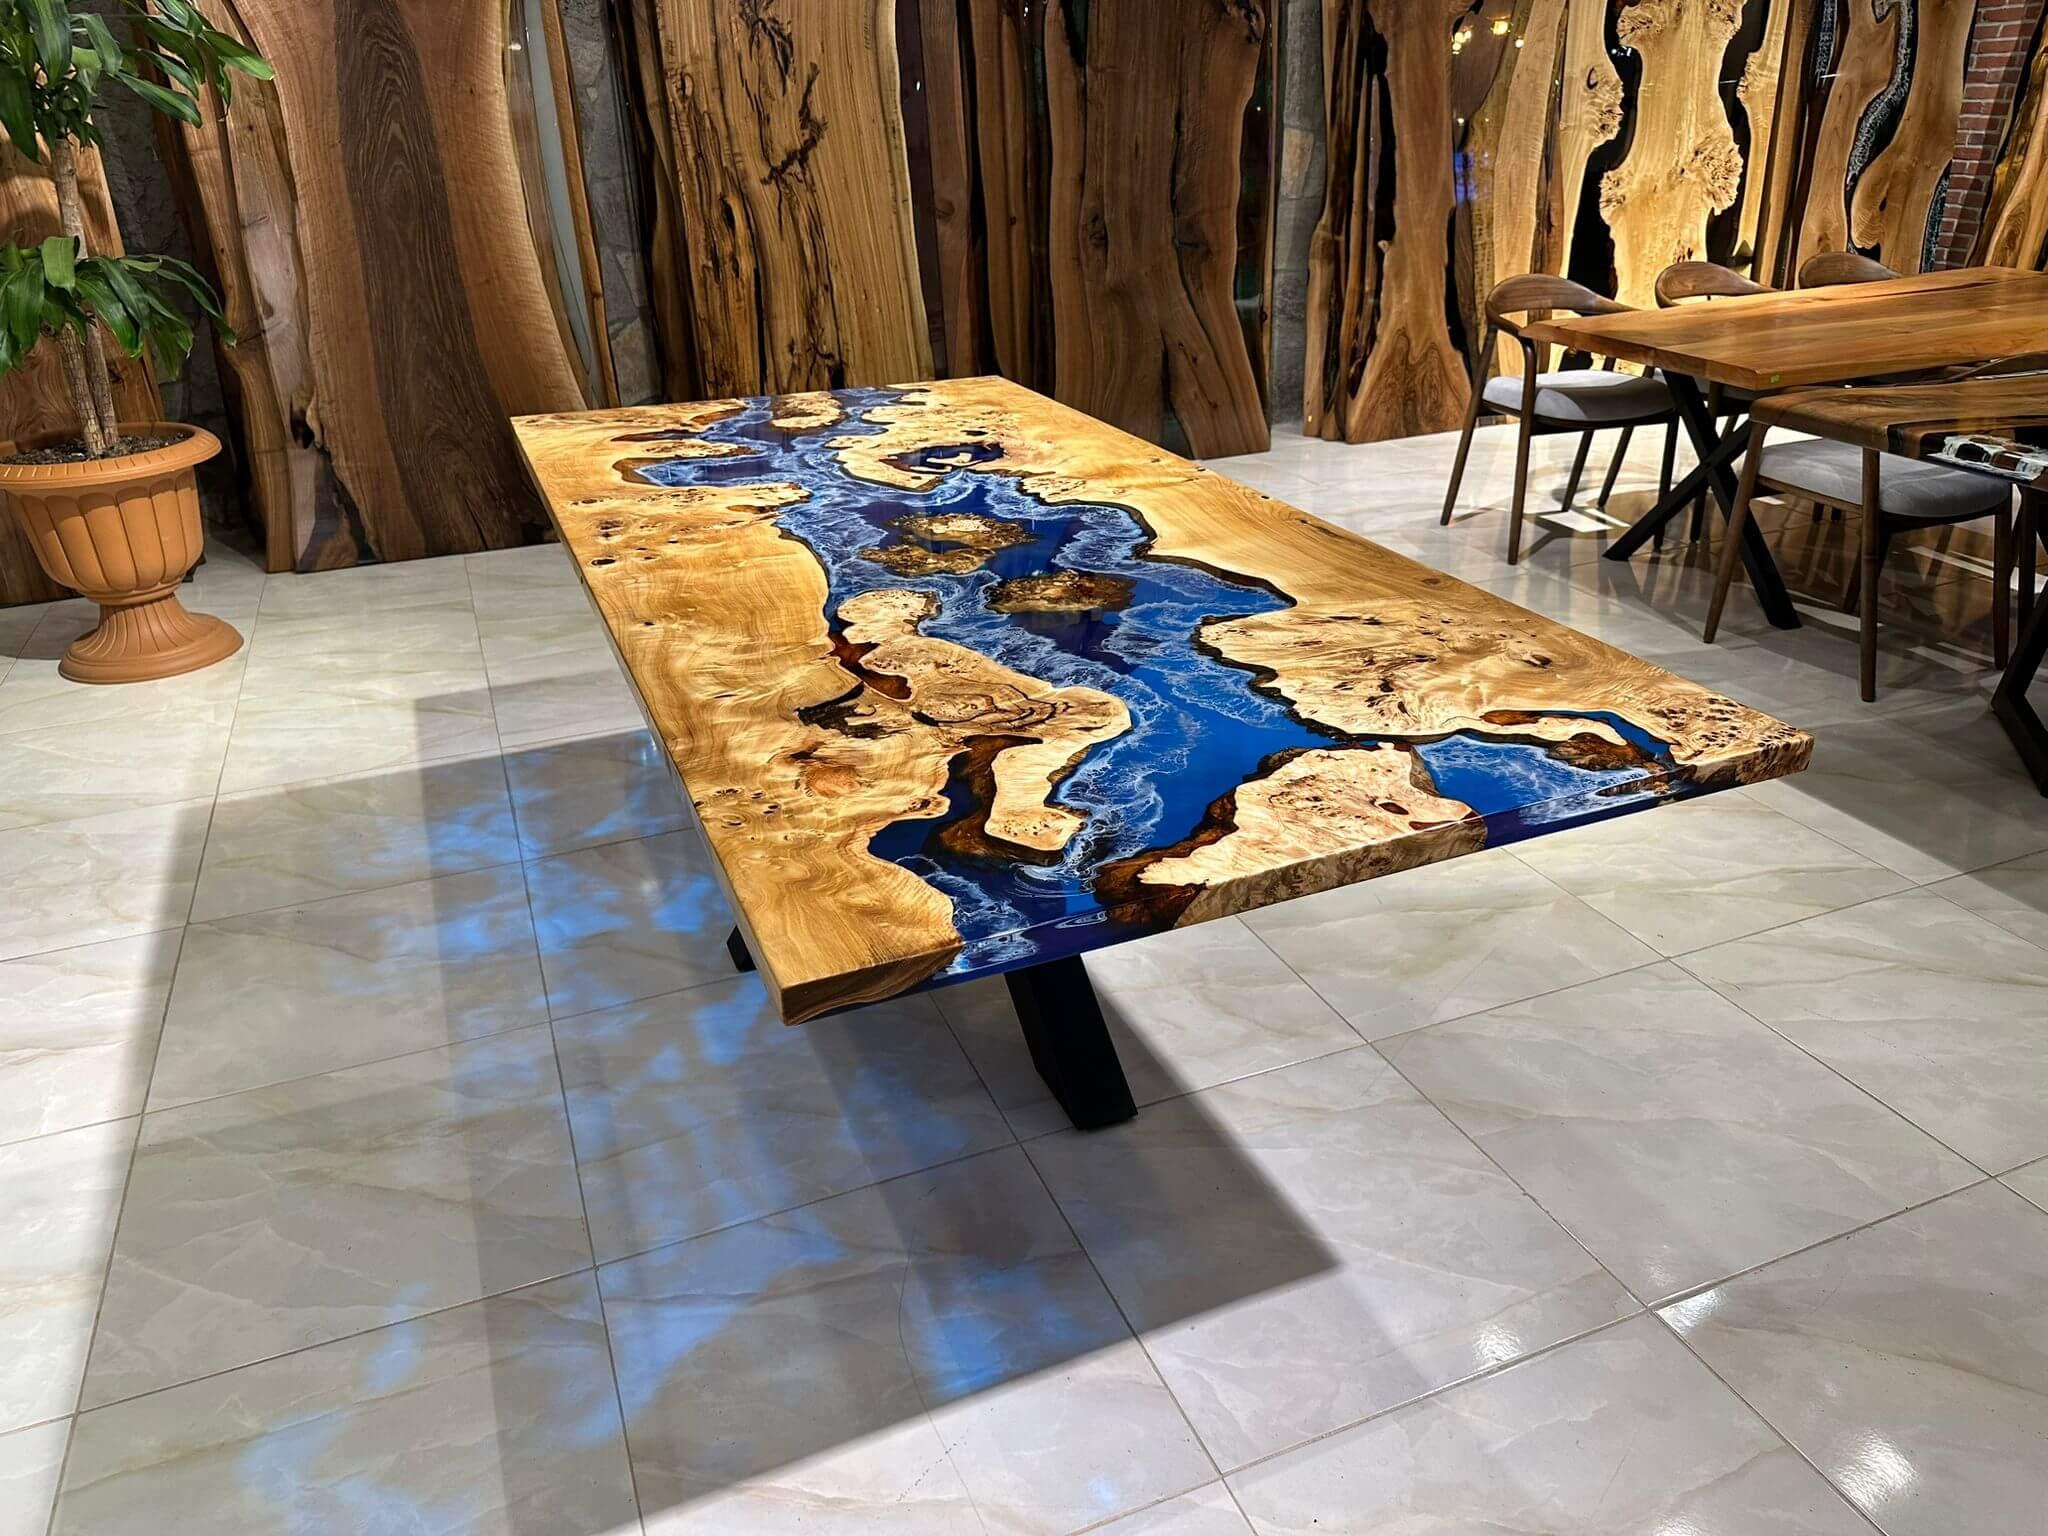 Custom Mappa Burl Blue Ocean Epoxy Resin Dining Table 

This table is made of Mappa Burl Wood. The grains and texture of the wood describe what a natural mappa burl woods looks like.
It can be used as a dining table or as a conference table.